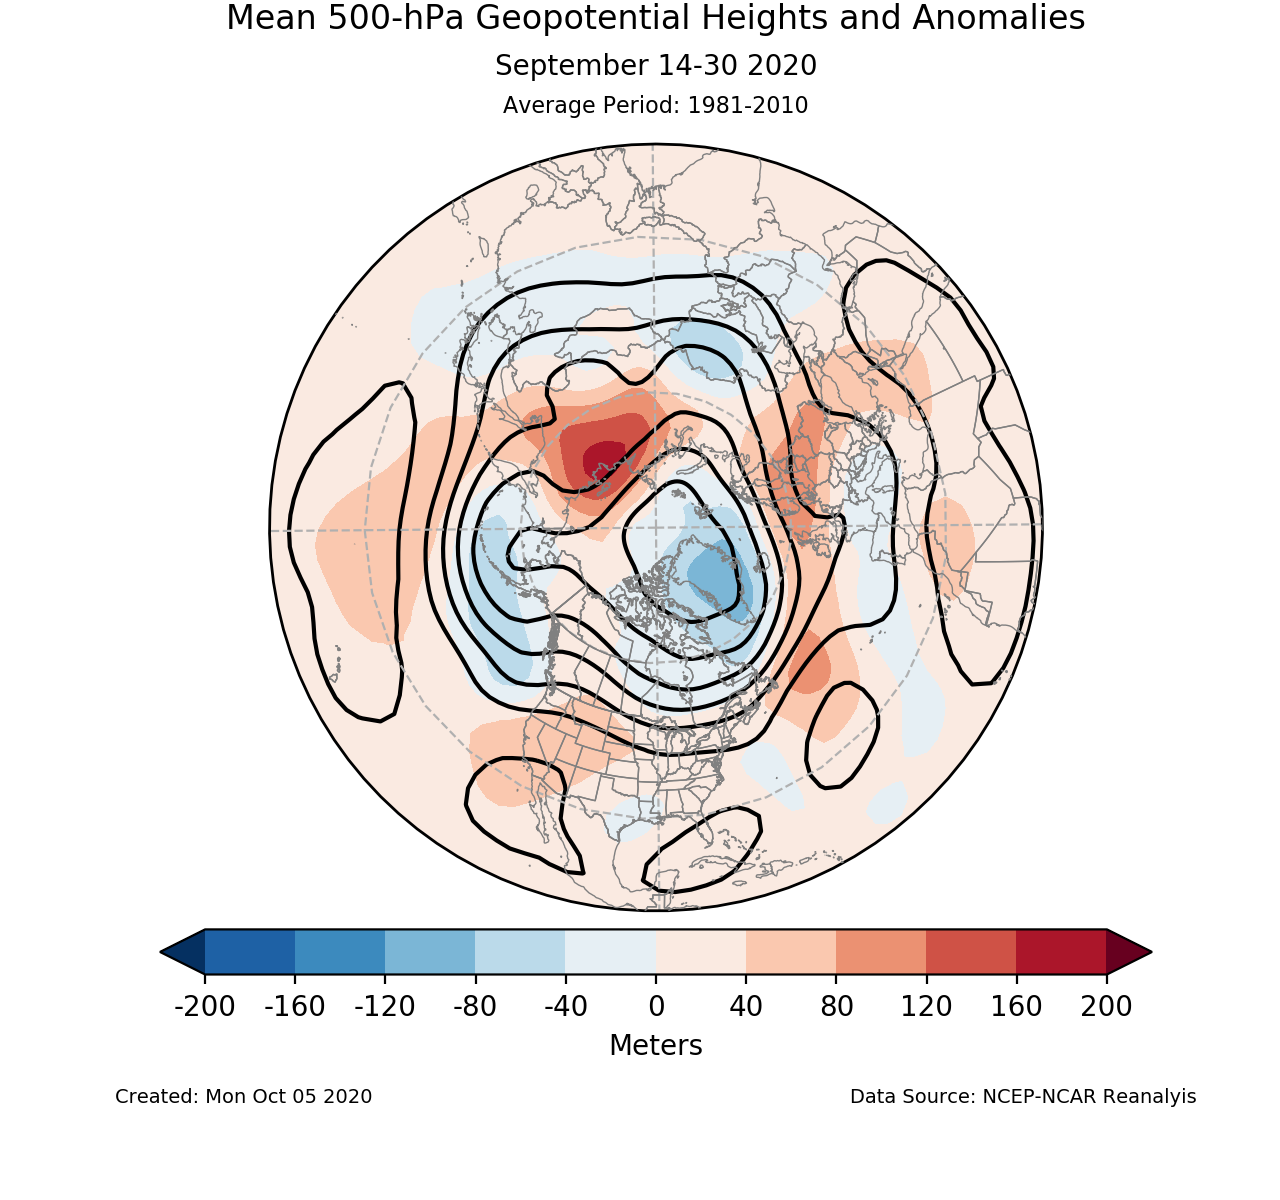 500-mb height mean (contours) and anomalies (shading) for the Northern Hemisphere for September 14-30 2020